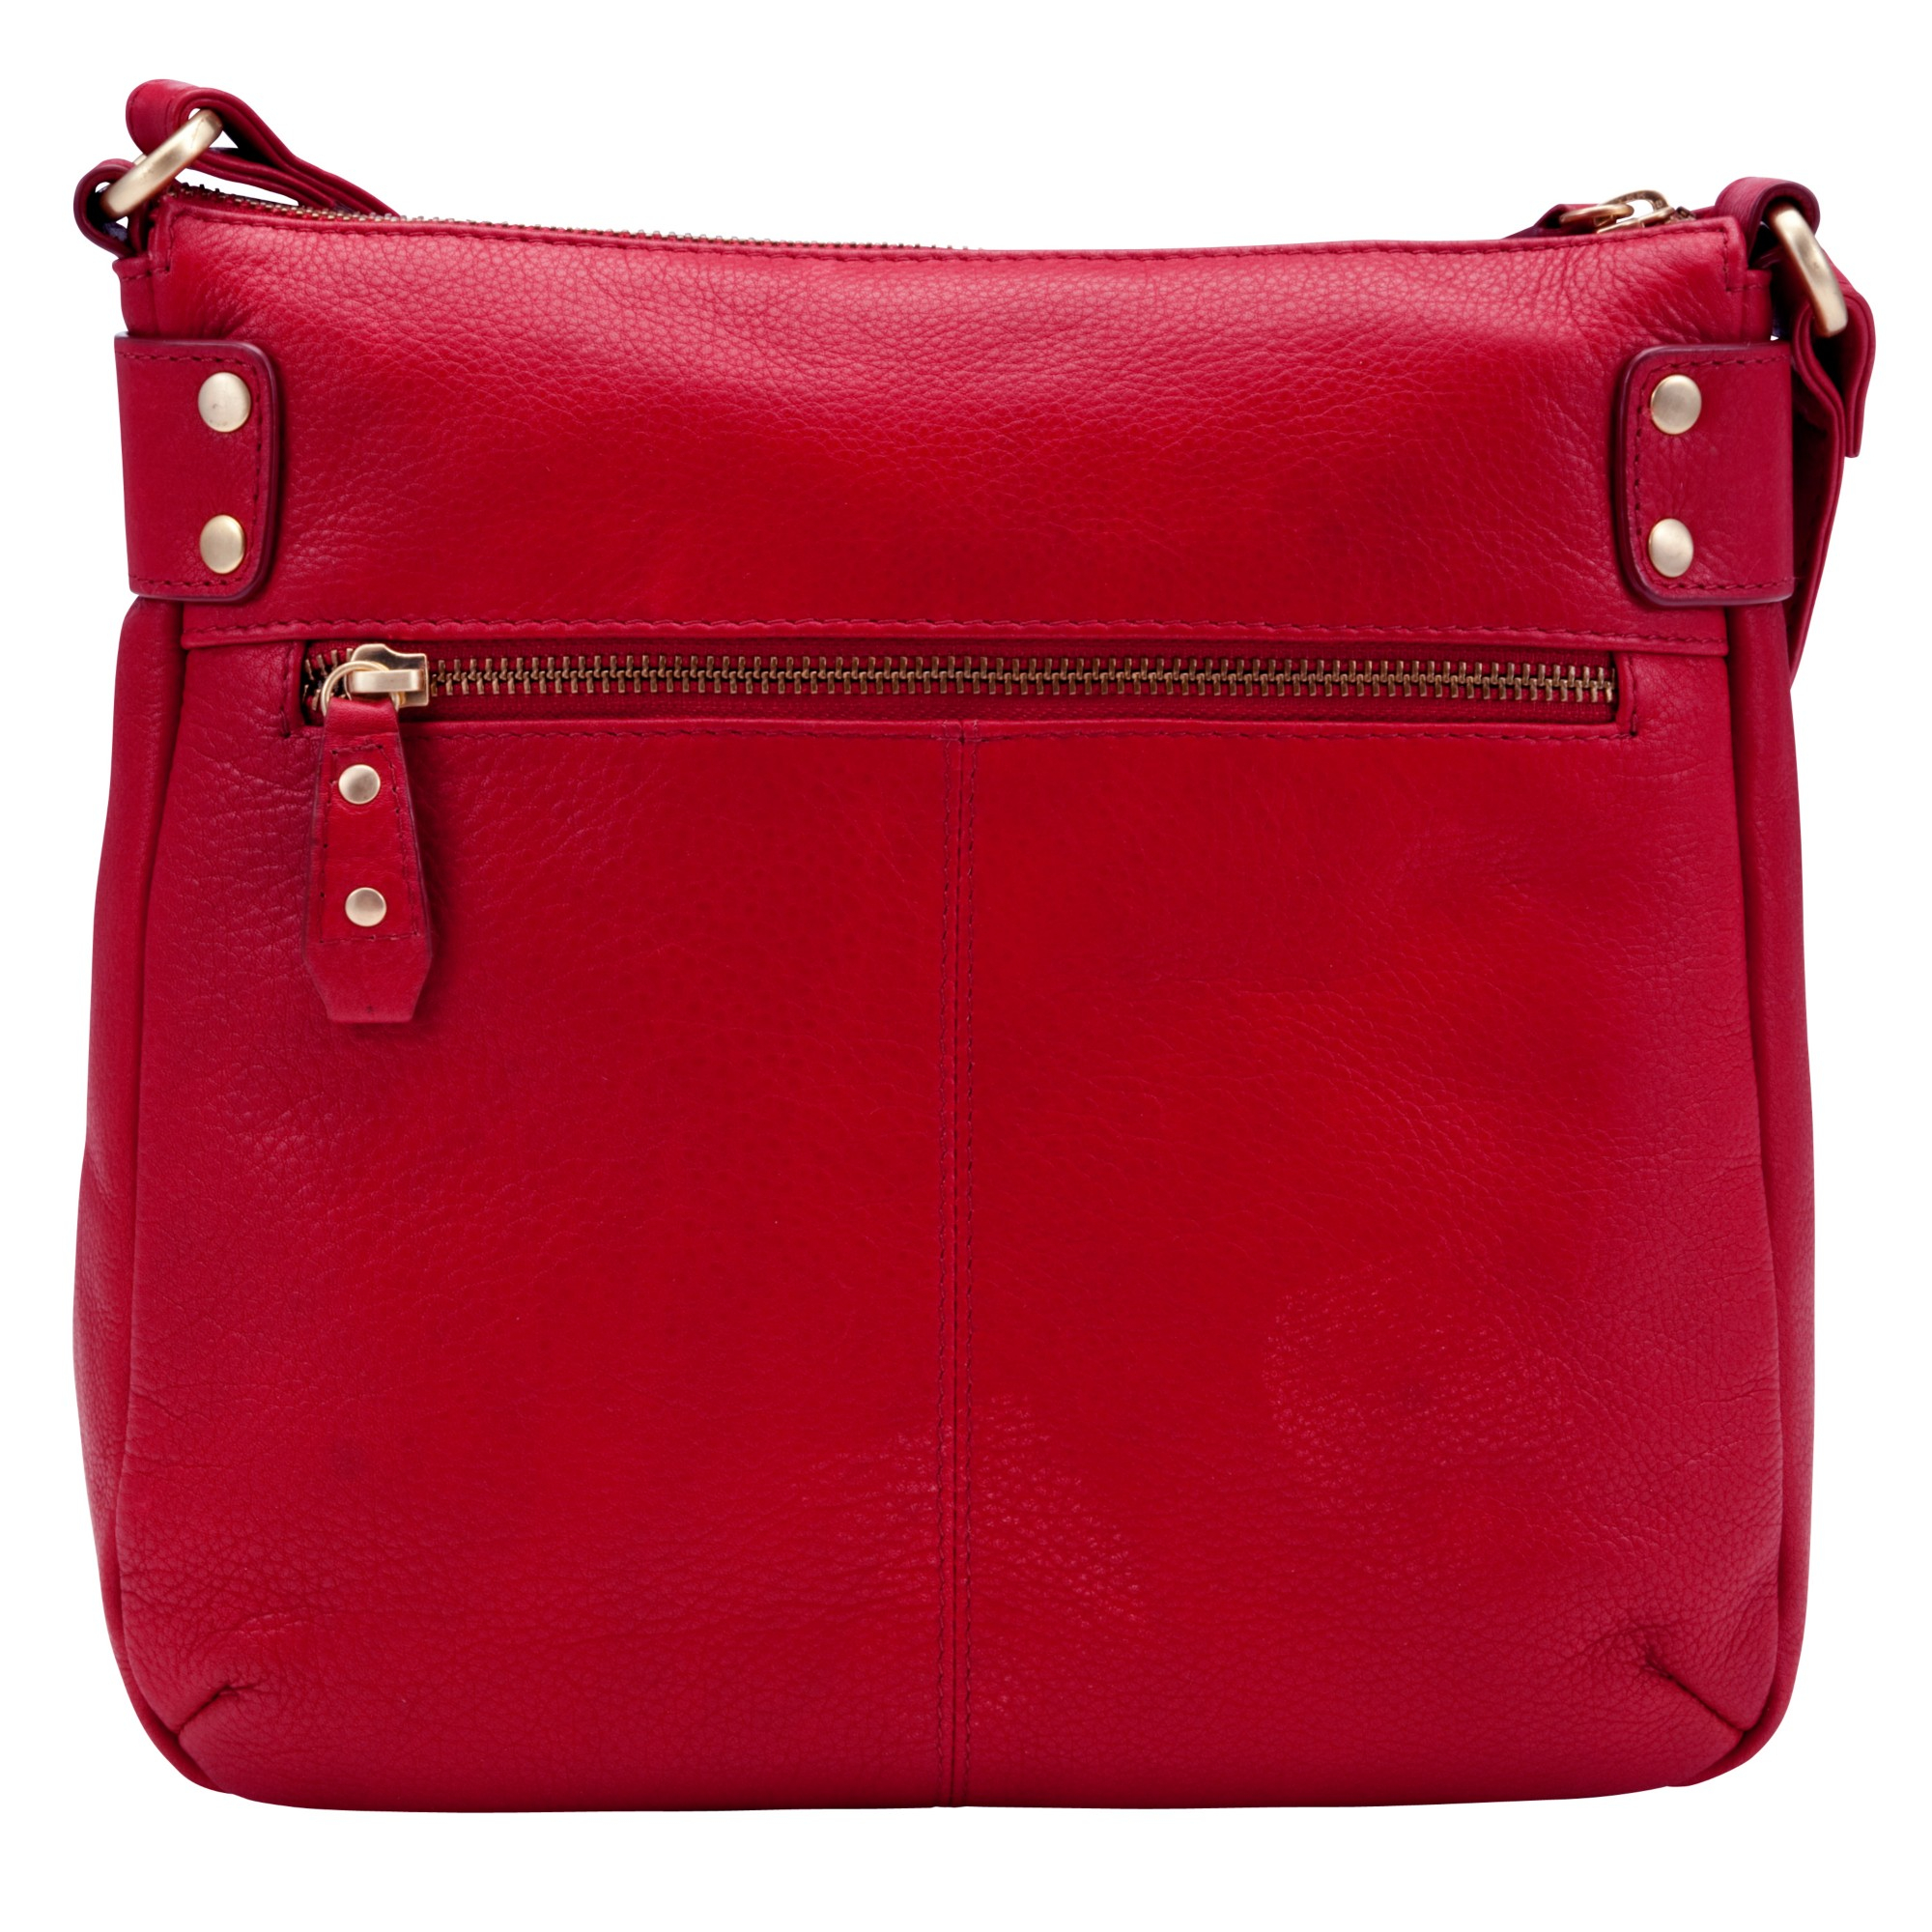 John Lewis Carlyle Large Square Across Body Bag in Red | Lyst